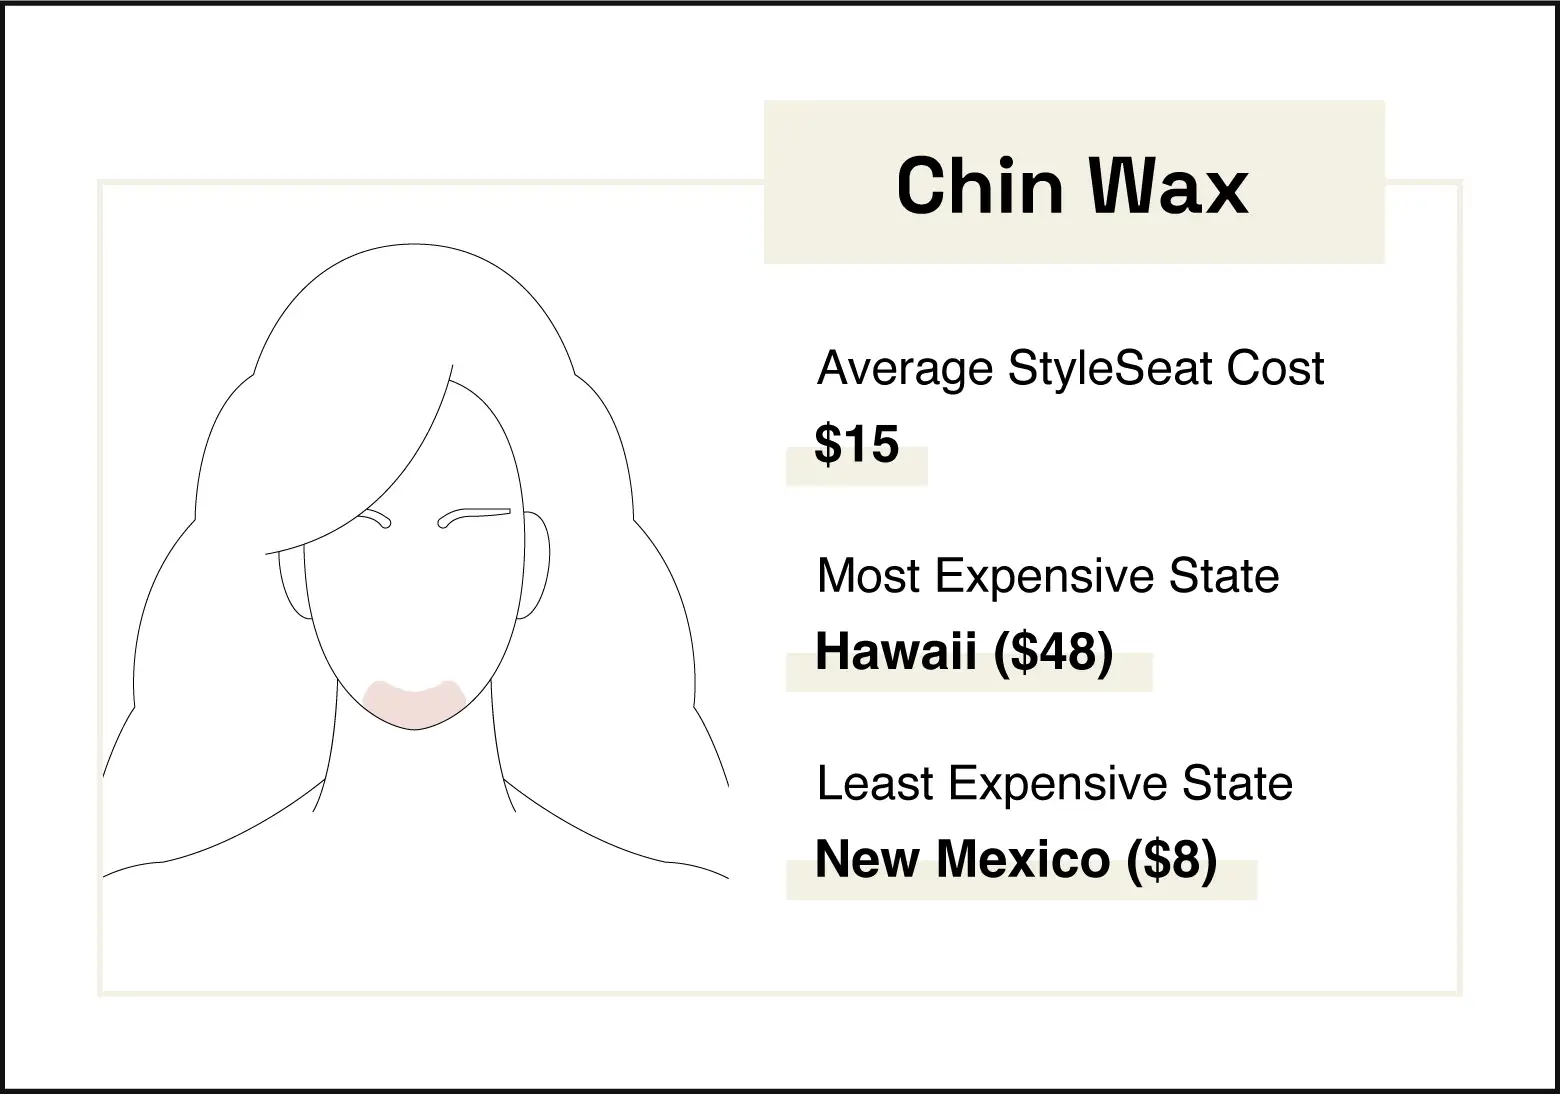 Image shows area where a chin wax occurs. The average chin wax on StyleSeat costs $15.